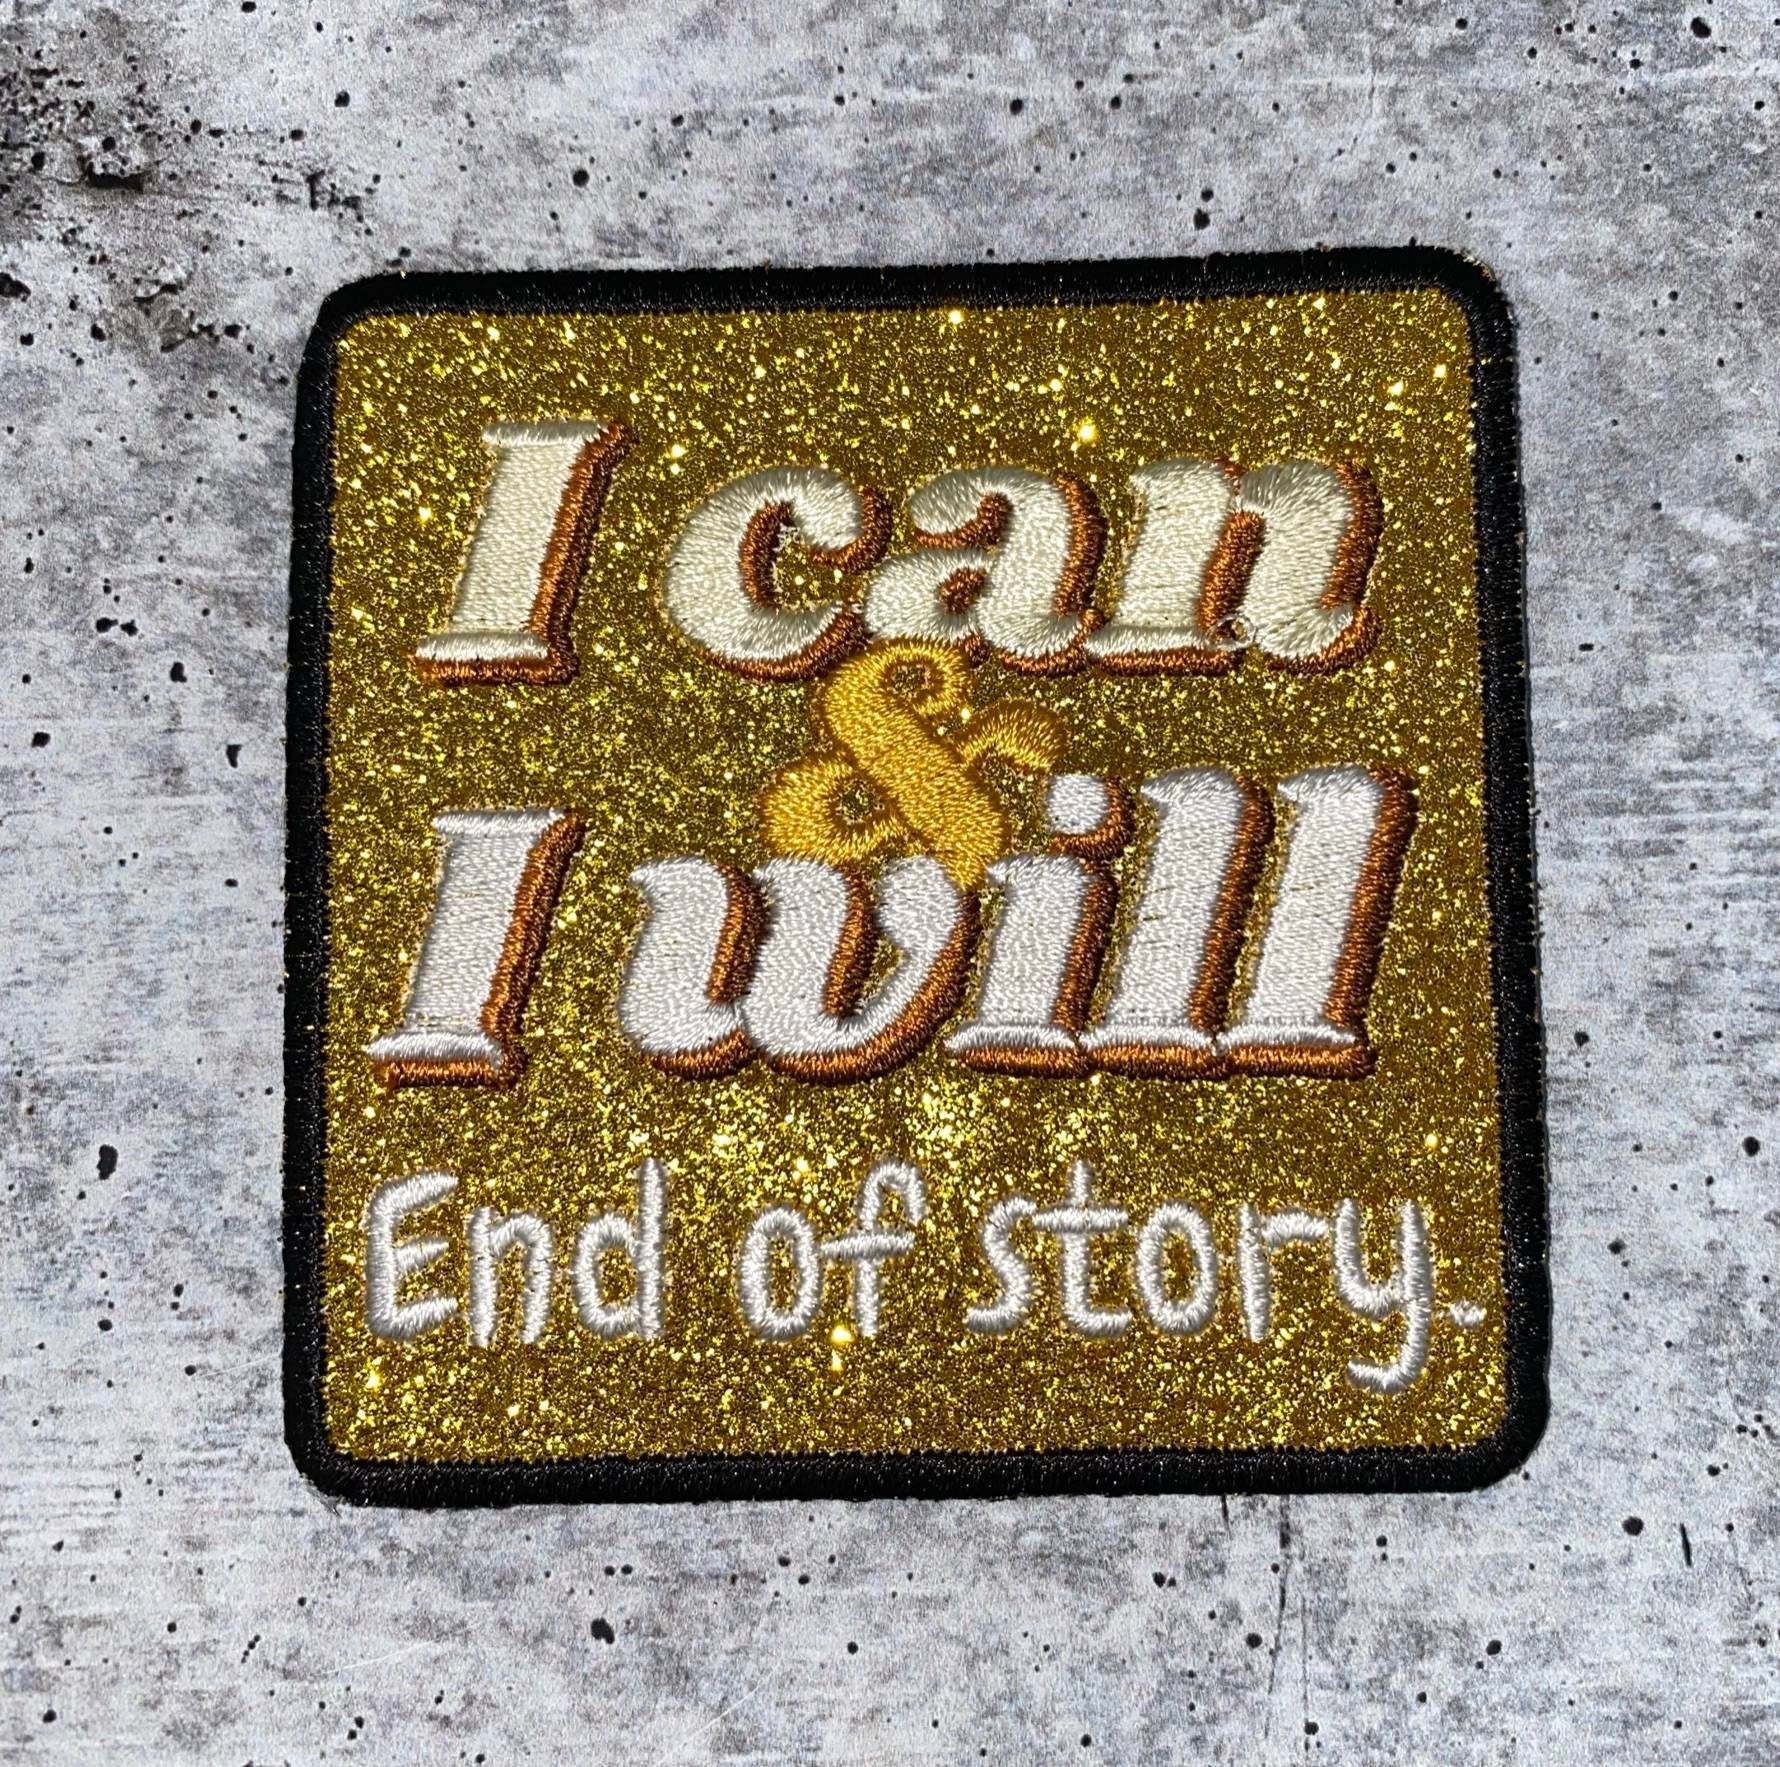 Exclusive, 1-pc, "I Can & I Will. End of Story" GOLD Glitter Bling Iron-on Badge, Size 3"x3" Cool Statement Patch for Apparel N Accessories